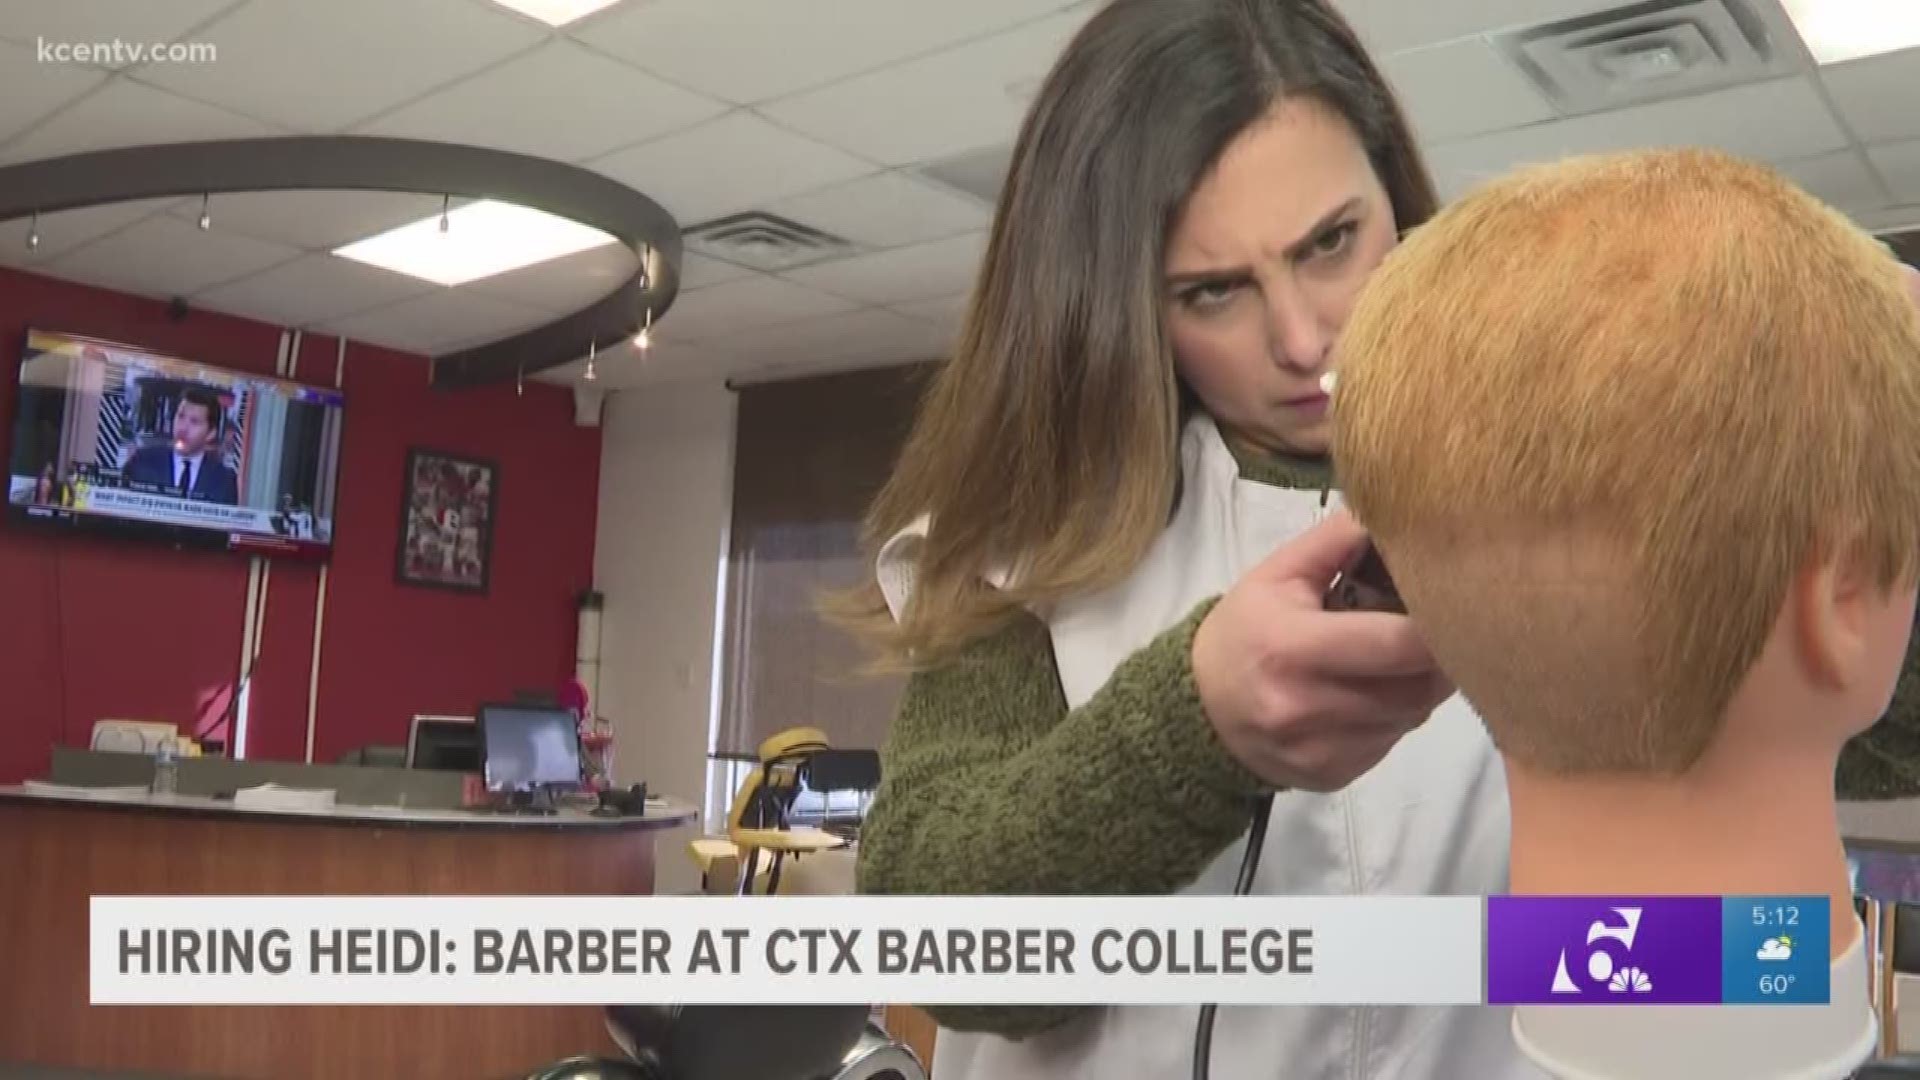 Morning anchor Heidi Alagha tries her hand at cutting hair in this edition of Hiring Heidi. If you have a job you want Heidi to attempt, email her at HAlagha@KCENtv.com